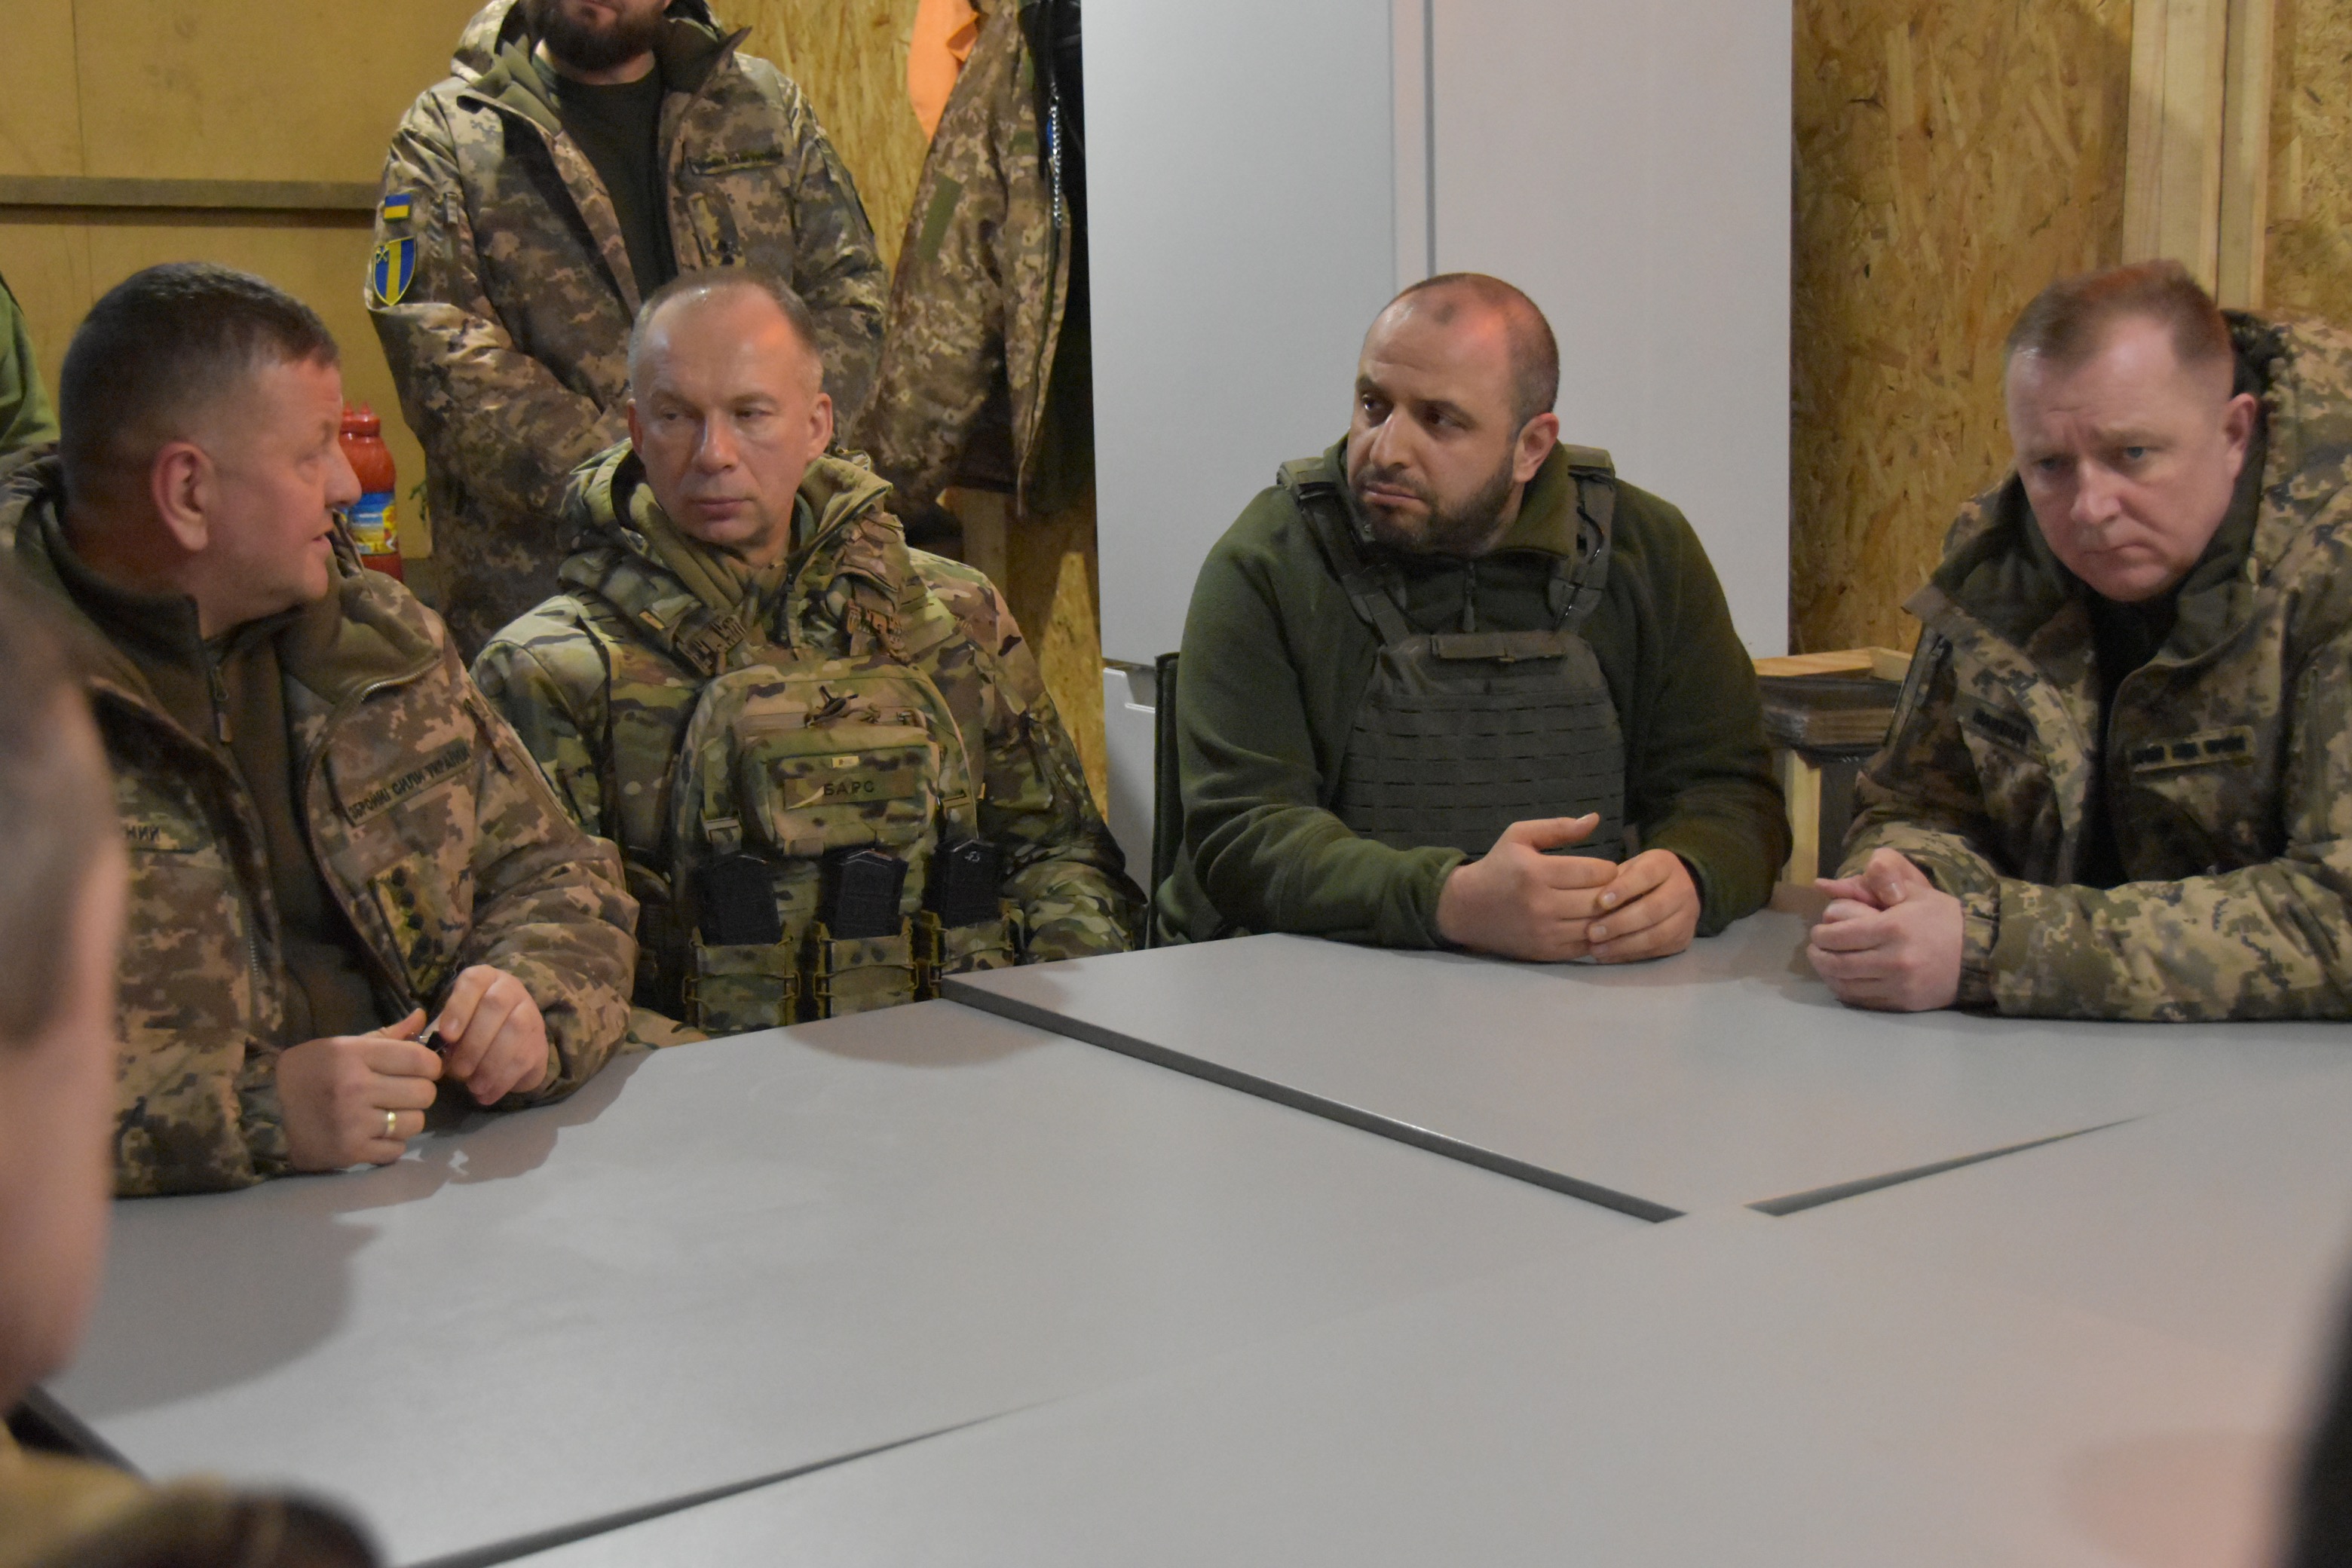 The Minister of Defense Rustem Umerov, along with the Commander-in-Chief and the Chief of the General Staff, visited positions in the area near Kupyansk